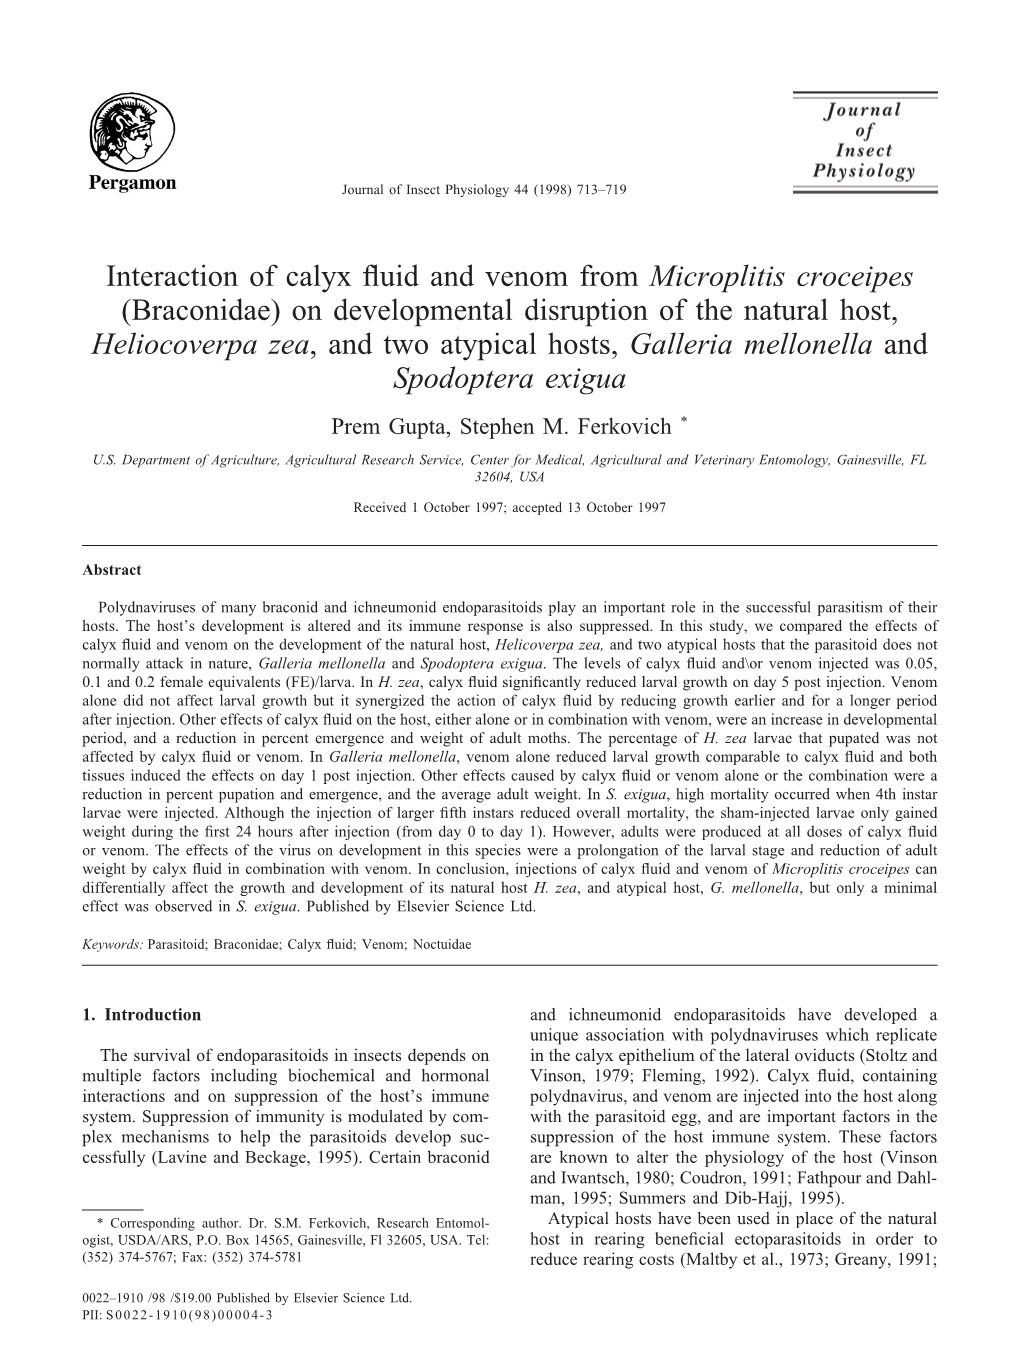 Interaction of Calyx Fluid and Venom from Microplitis